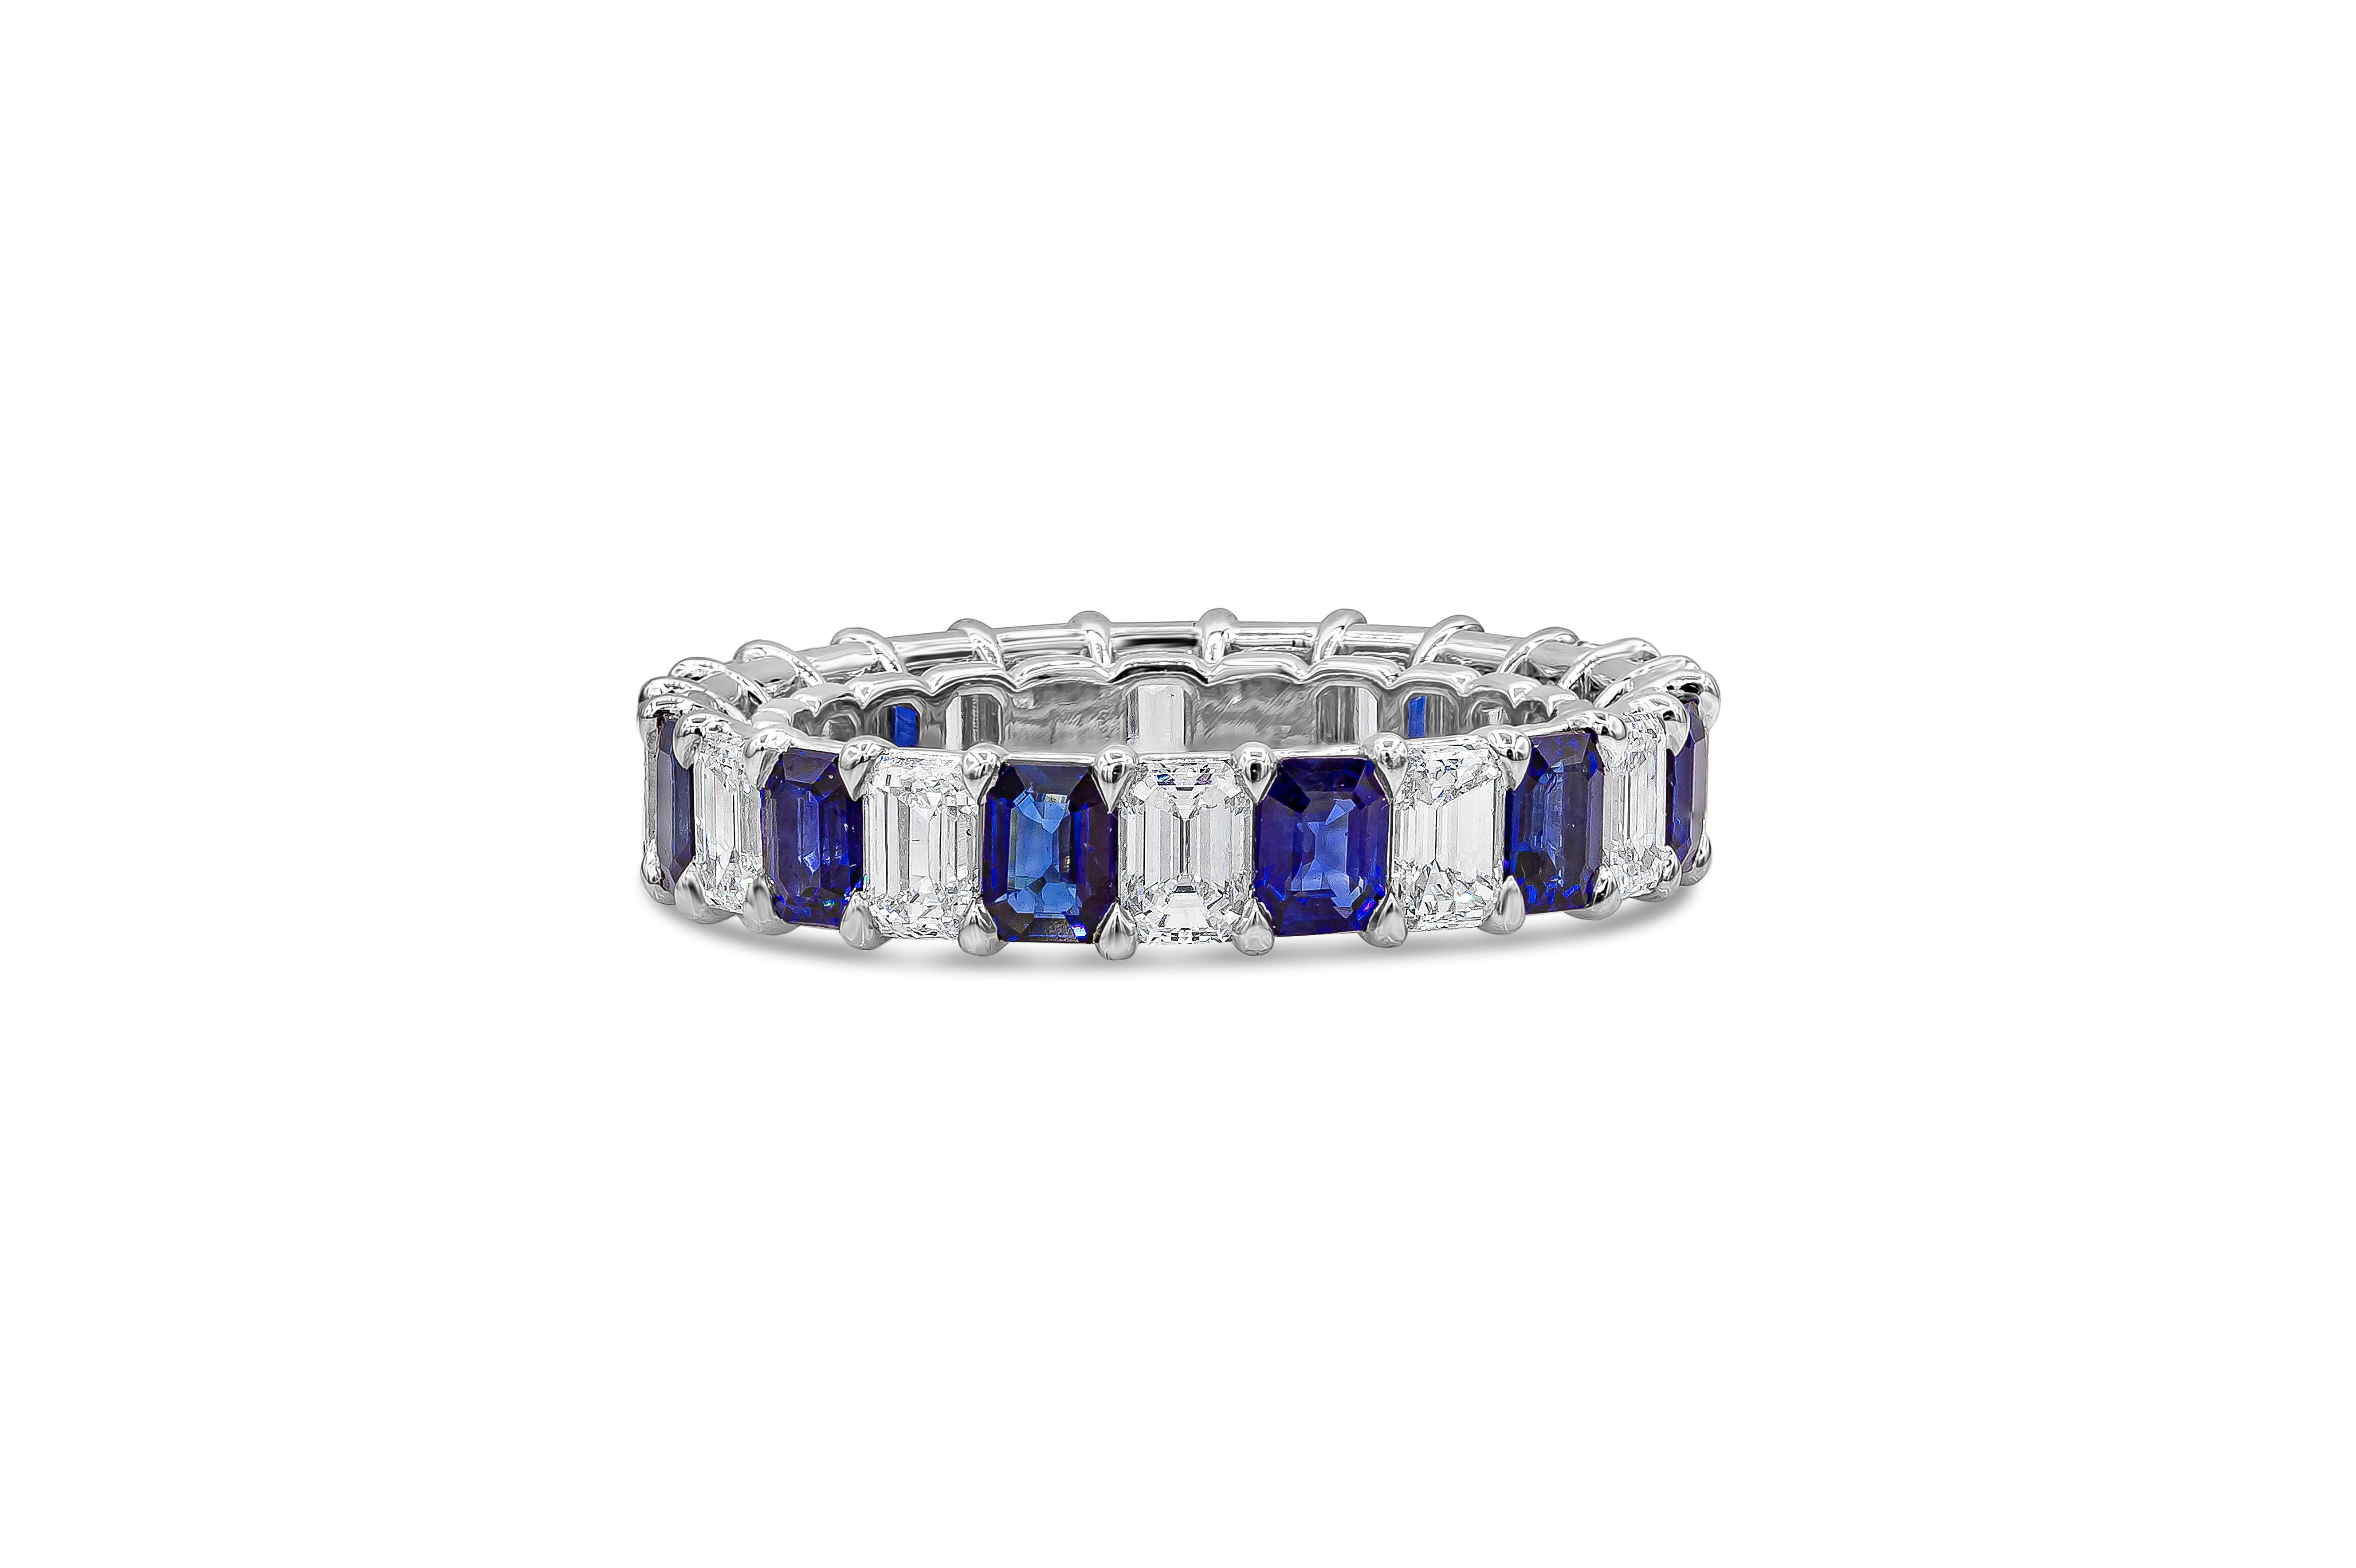 A beautiful and vibrant wedding band showcasing 2.73 carats of emerald cut blue sapphires that alternate with 2.28 carats of emerald cut diamonds, F Color and VS in Clarity. Set in an open-gallery mounting. Made with Platinum. Size 6.5 US

Style